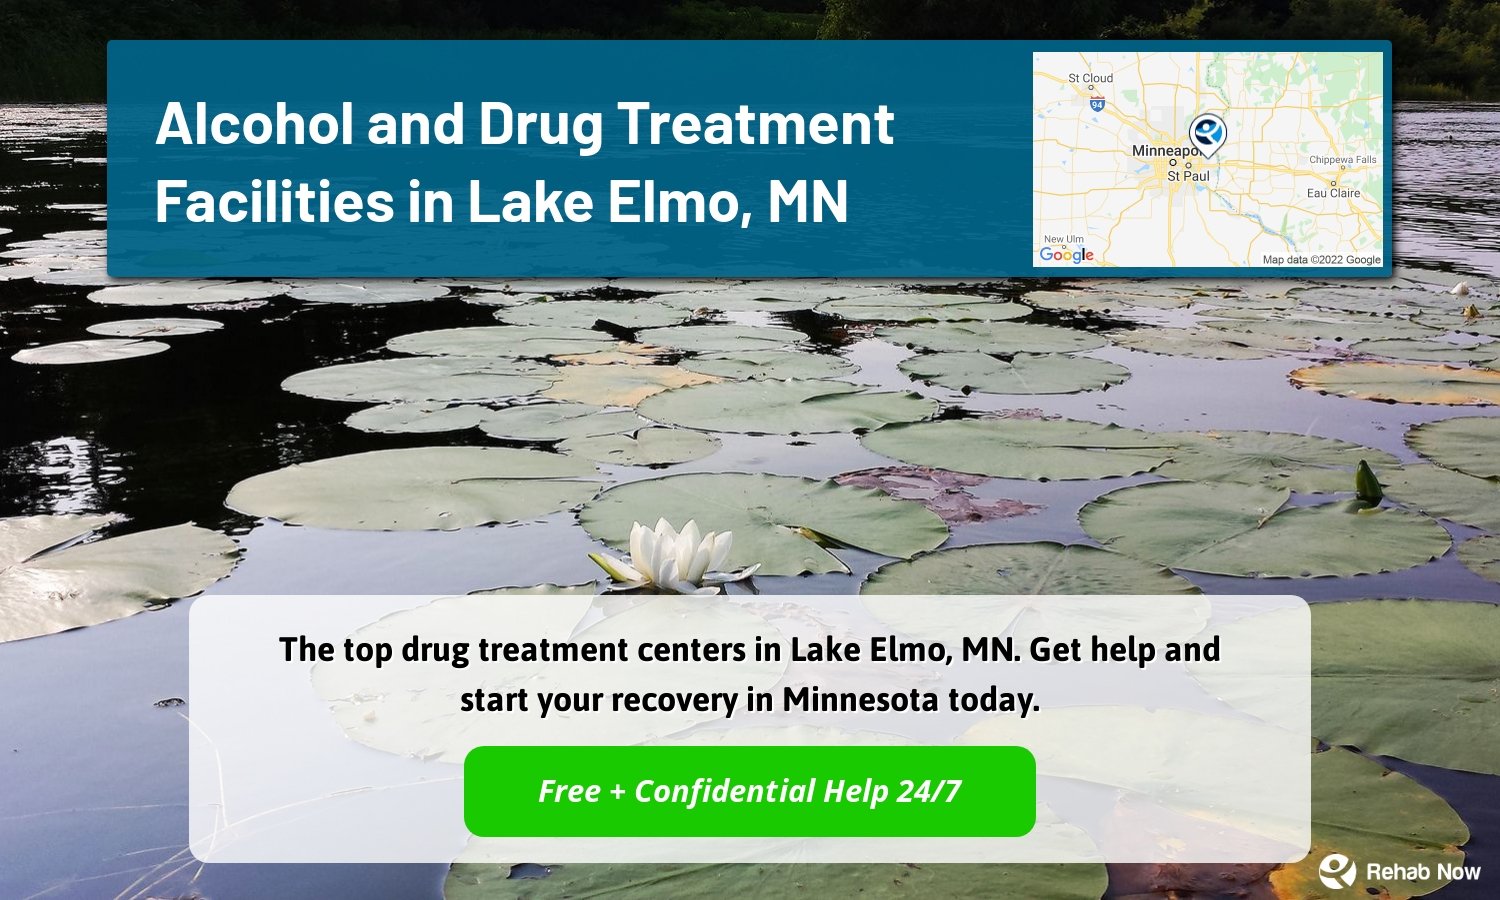 The top drug treatment centers in Lake Elmo, MN. Get help and start your recovery in Minnesota today.